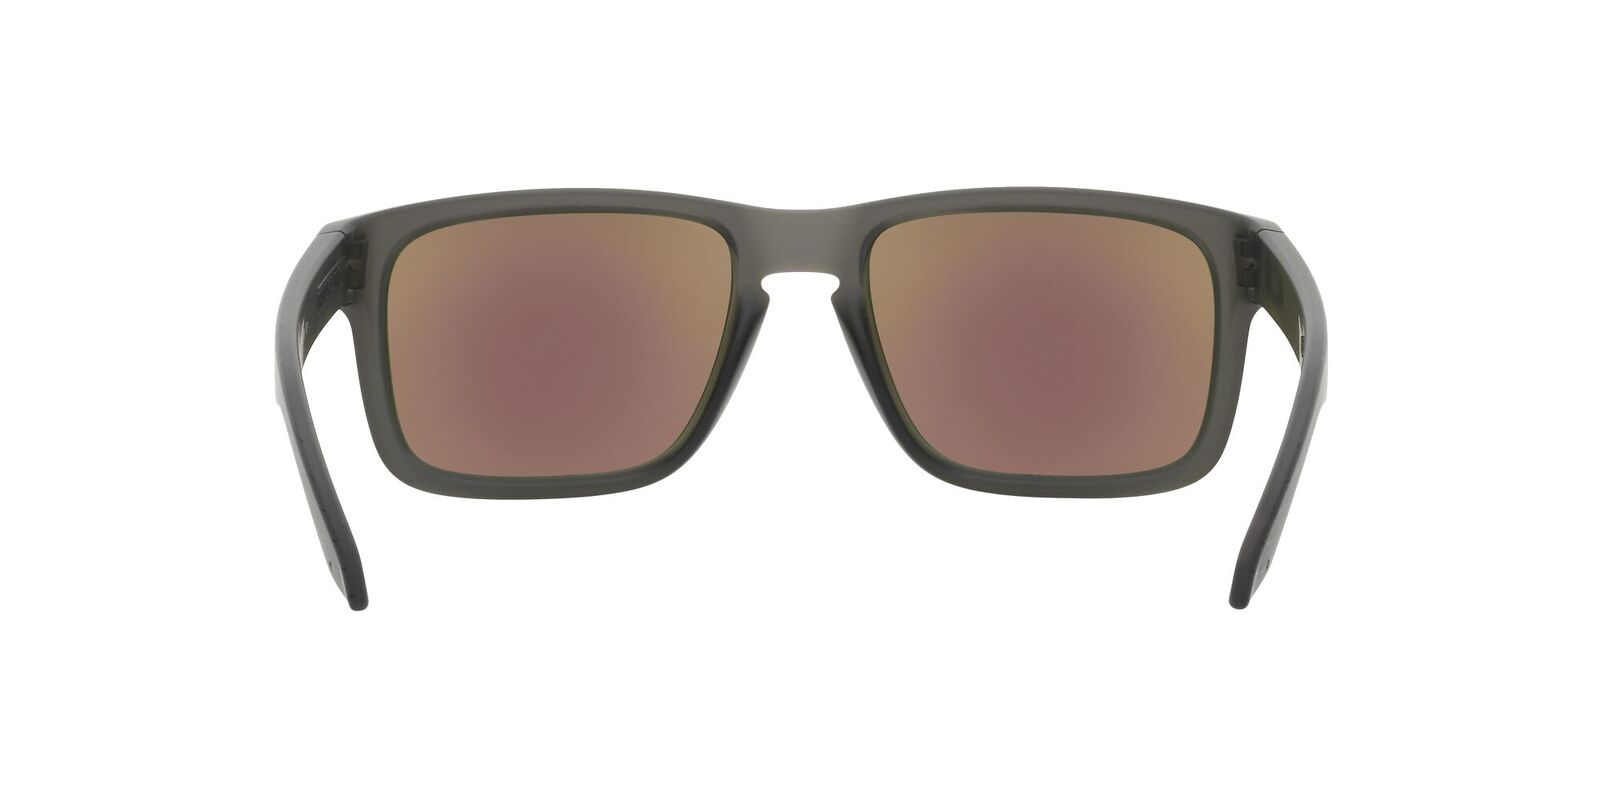 Oakley Sunglasses - OO 9235 | Vision Express